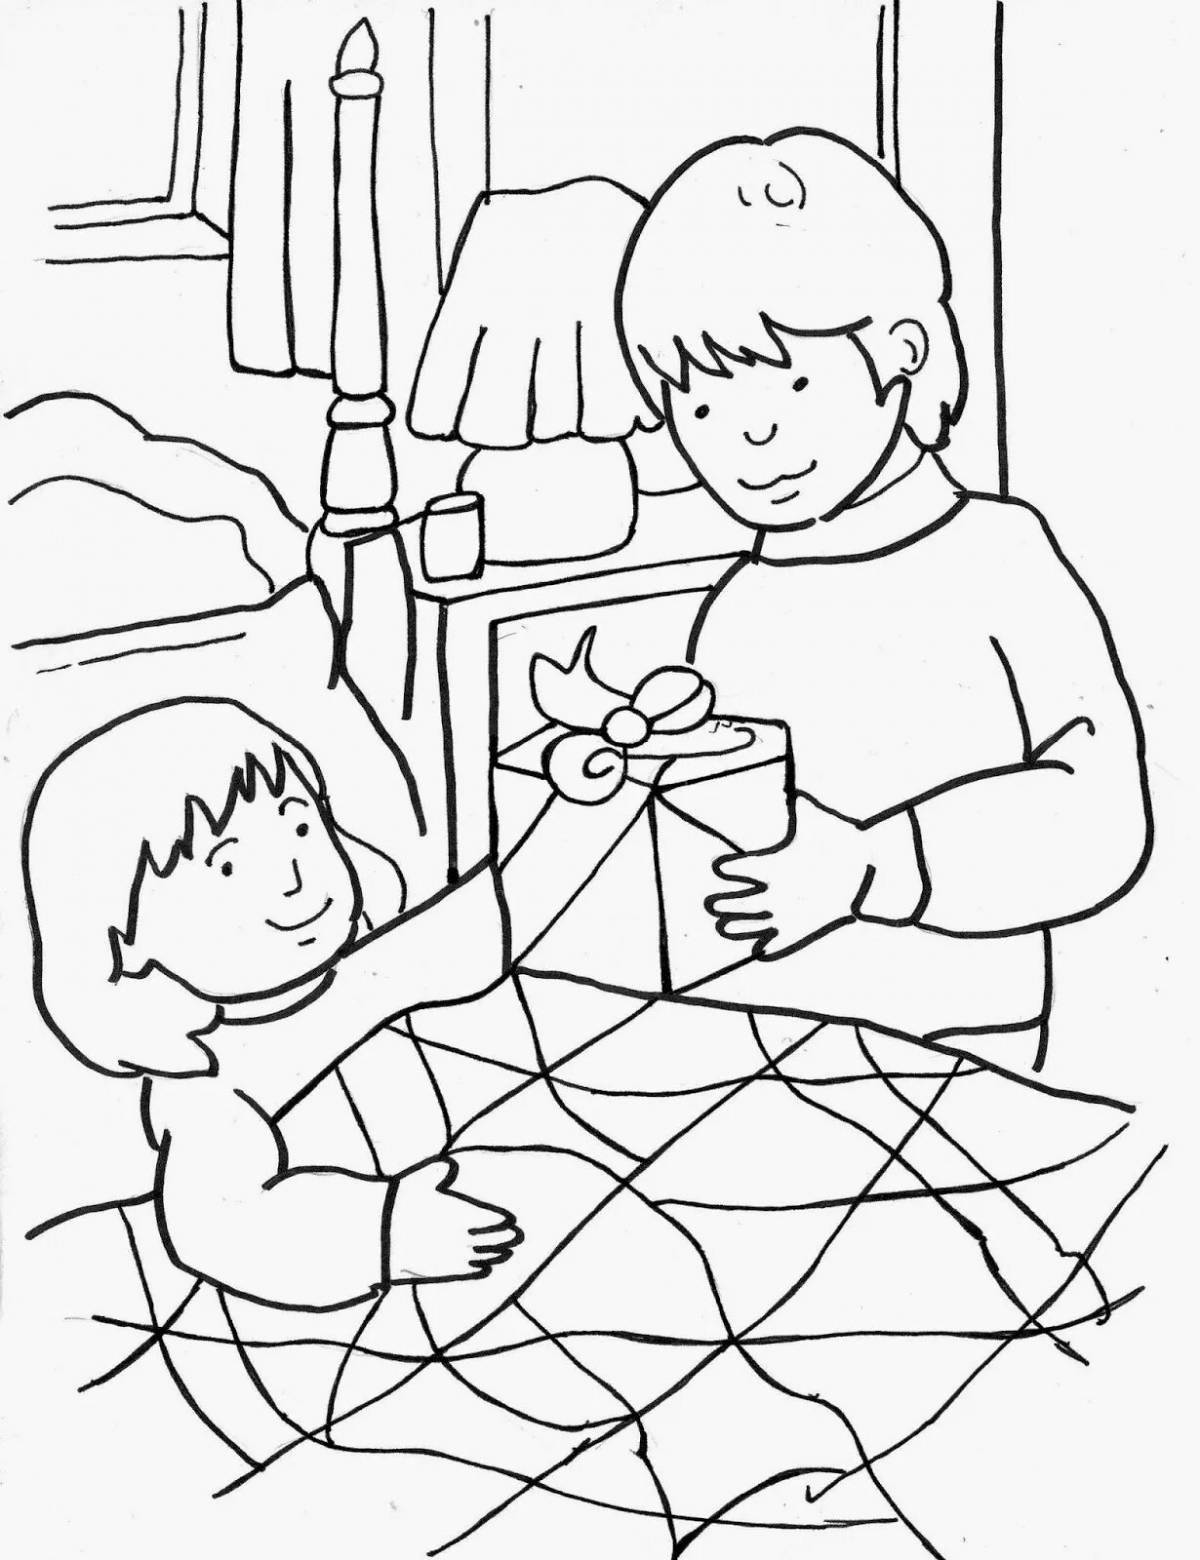 Fancy good deeds coloring page